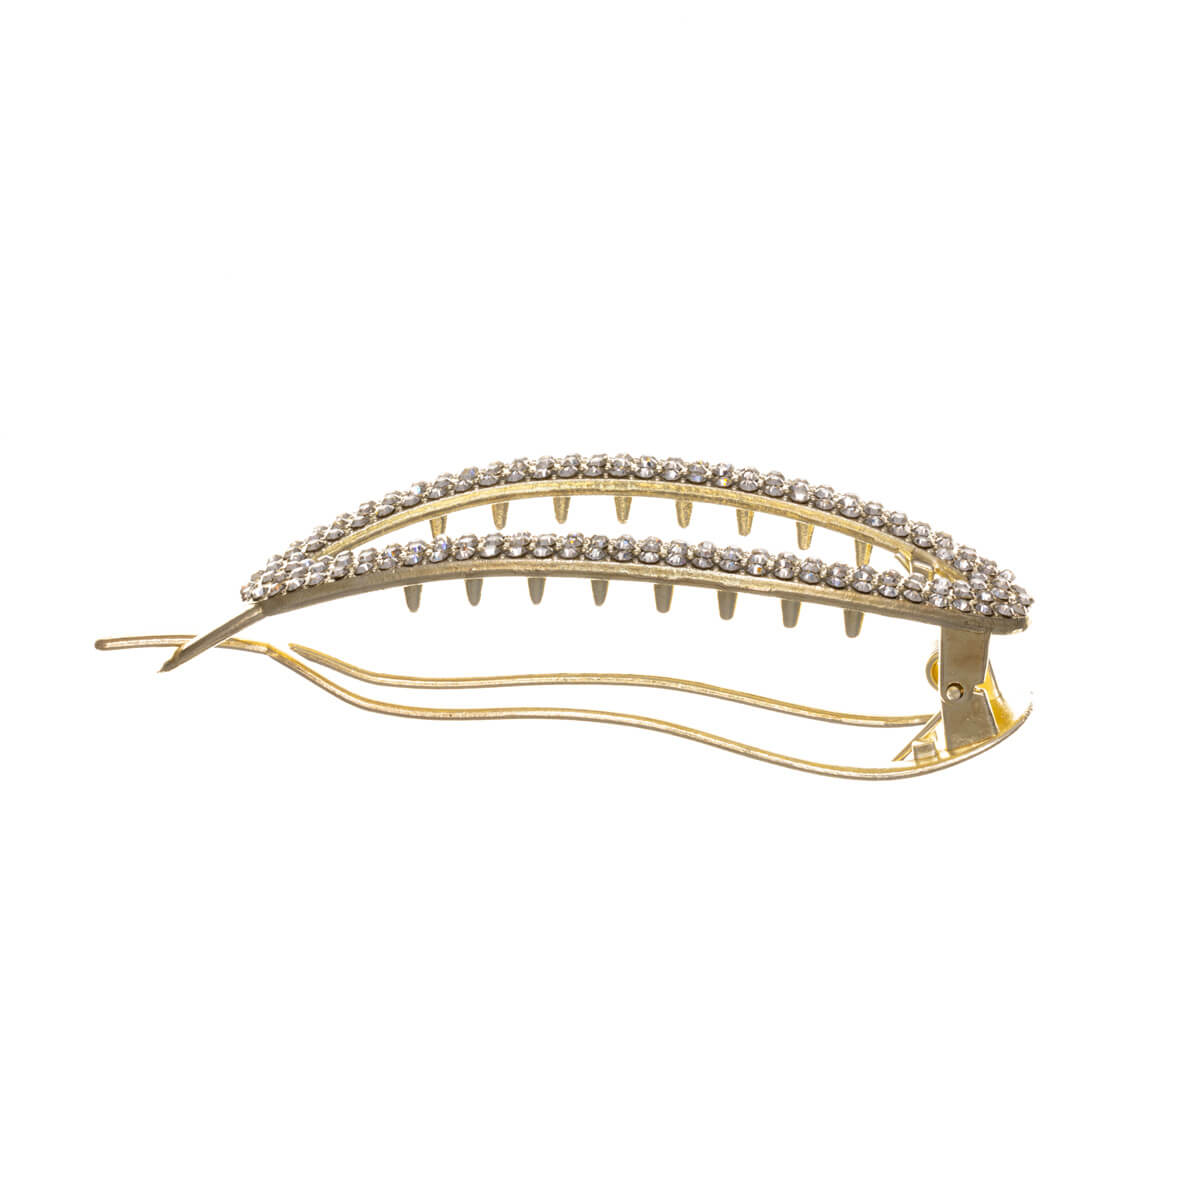 Oval hair clip with spring decorated with glass stone